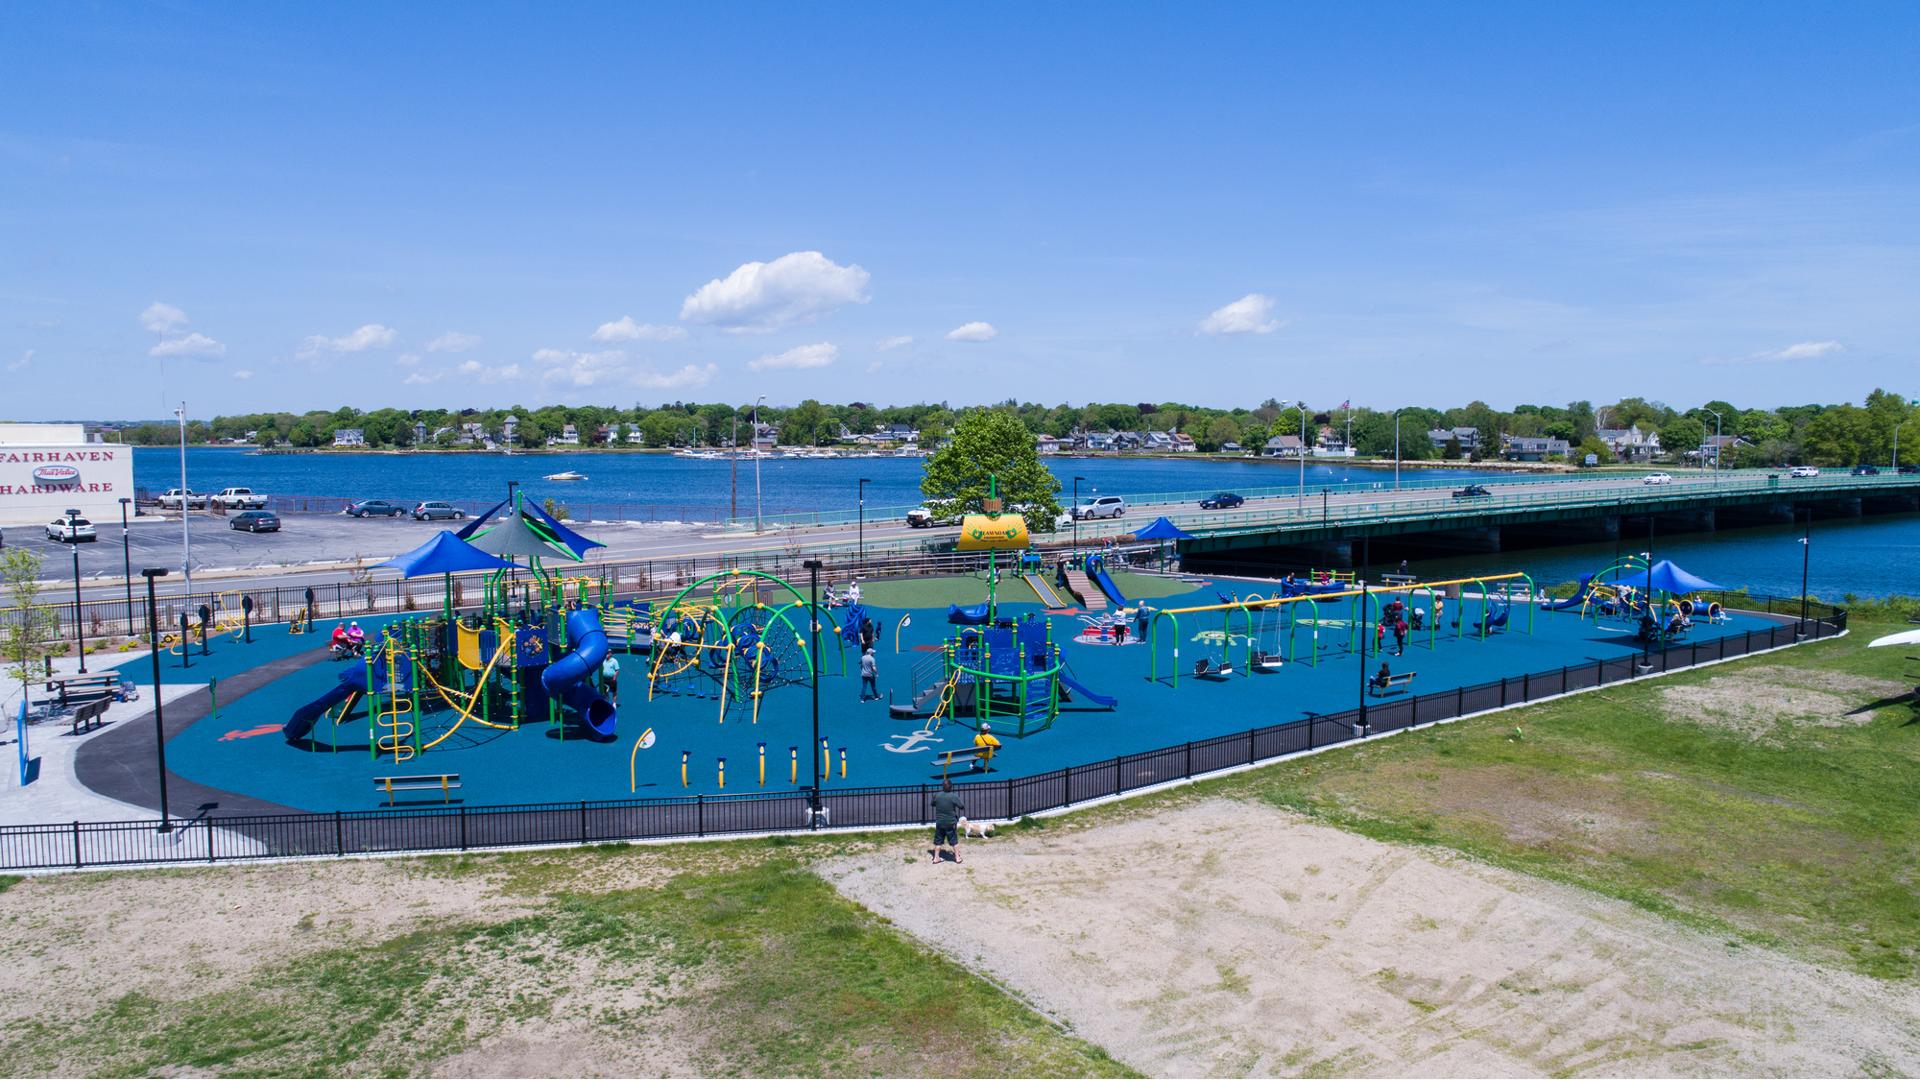 Noah's Place Playground New Bedford, MA offers a fully ramped PlayBooster® playstructure along with the Sensory Play Center®, Sway Fun® glider, We-saw™ and OmniSpin® spinner. In addition, there is a ship-themed playstructure, playground swings, net climbers and a Weevos® playstructure.